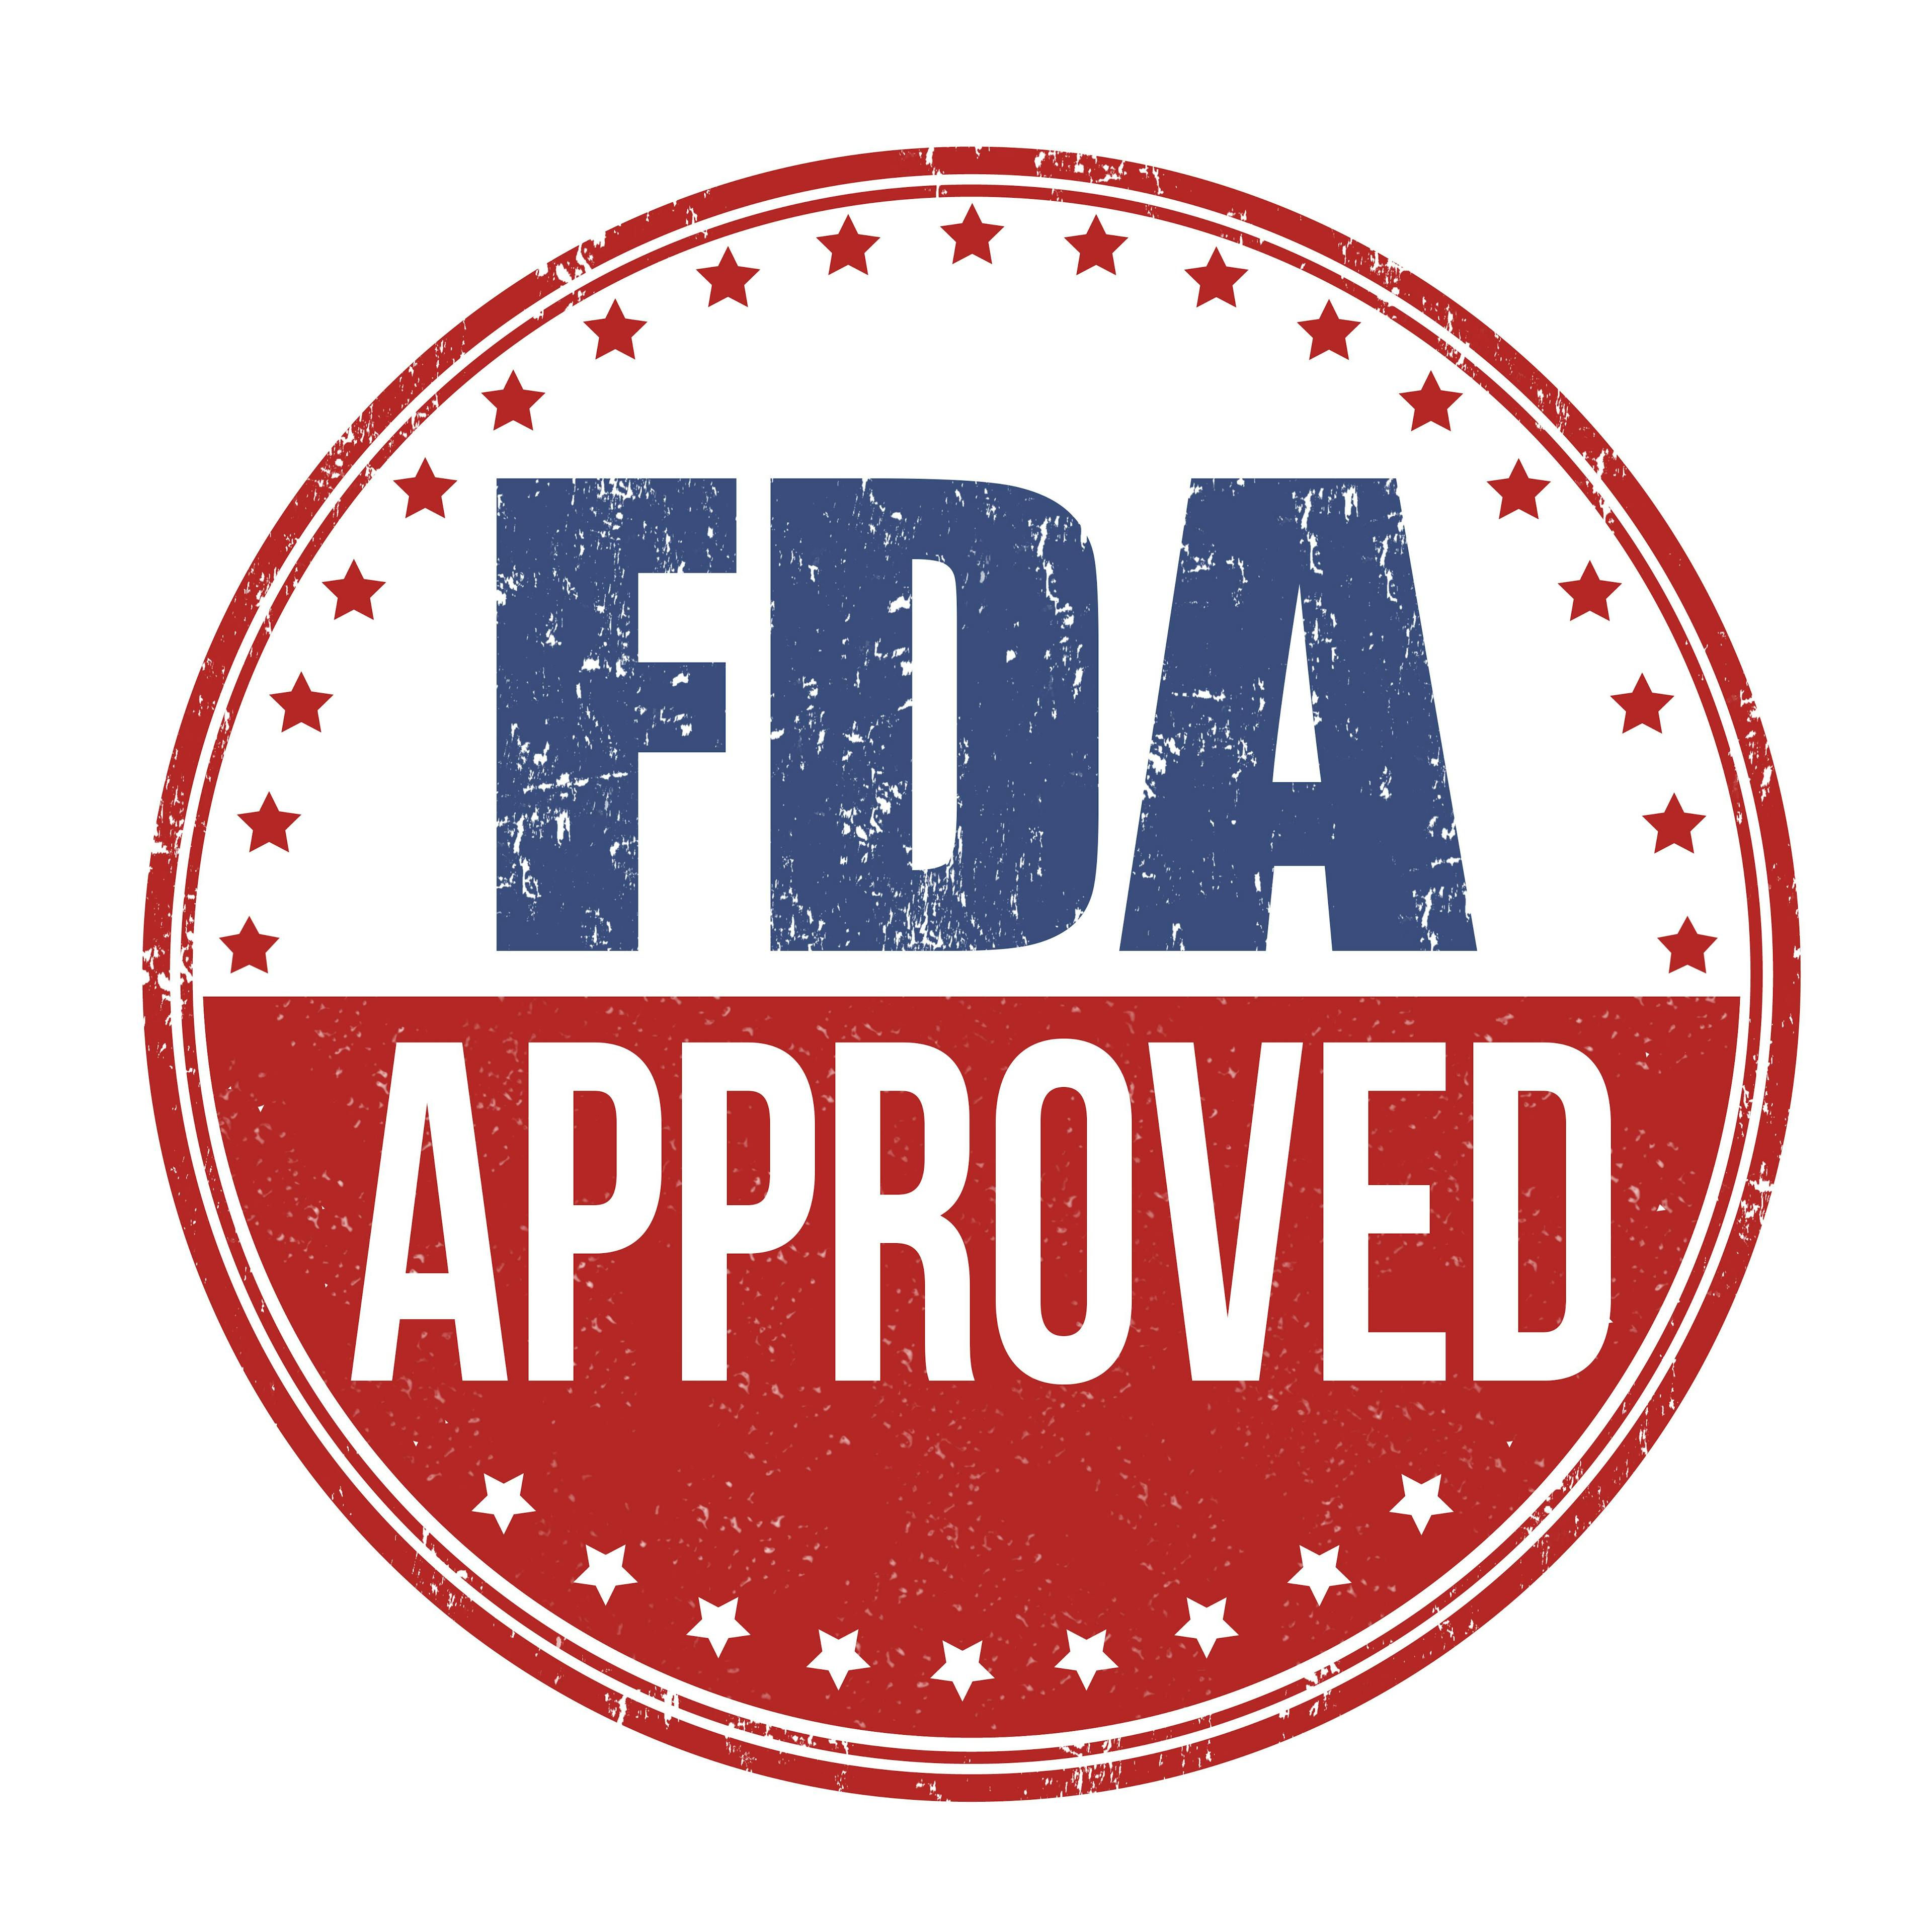 FDA Clears Targeted Therapy, Diagnostic for Metastatic RET Fusion-Positive NSCLC